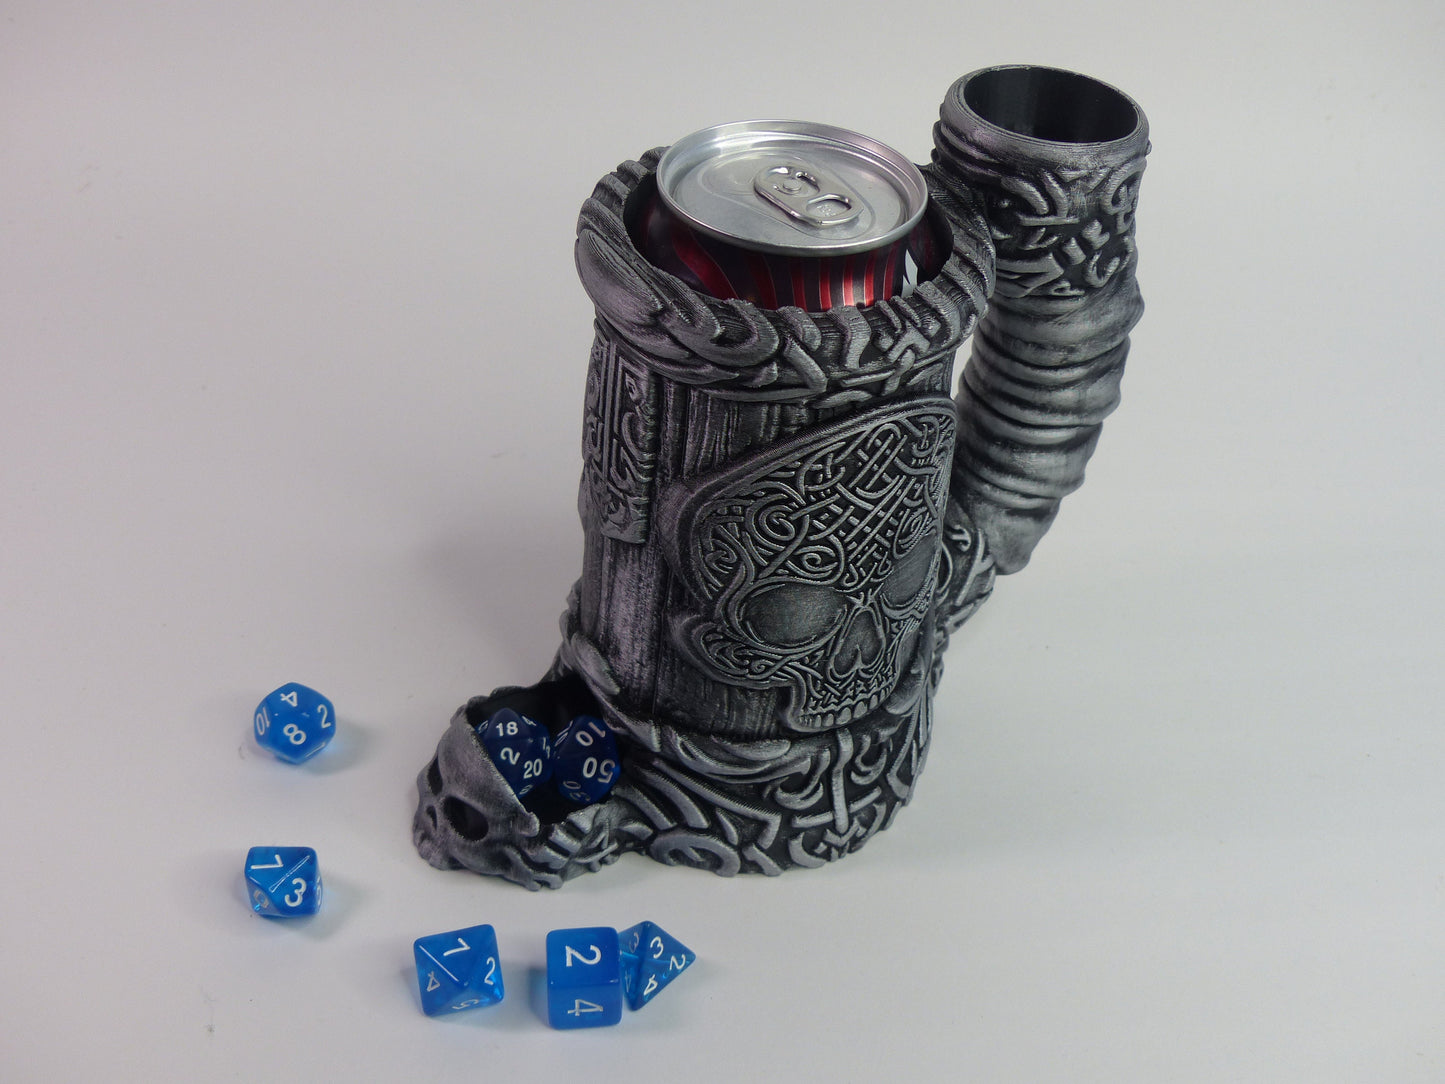 Celtic Skull Can Cosy/Cozy DnD Dice Tower - 3D printed and hand painted - Can be personalised!